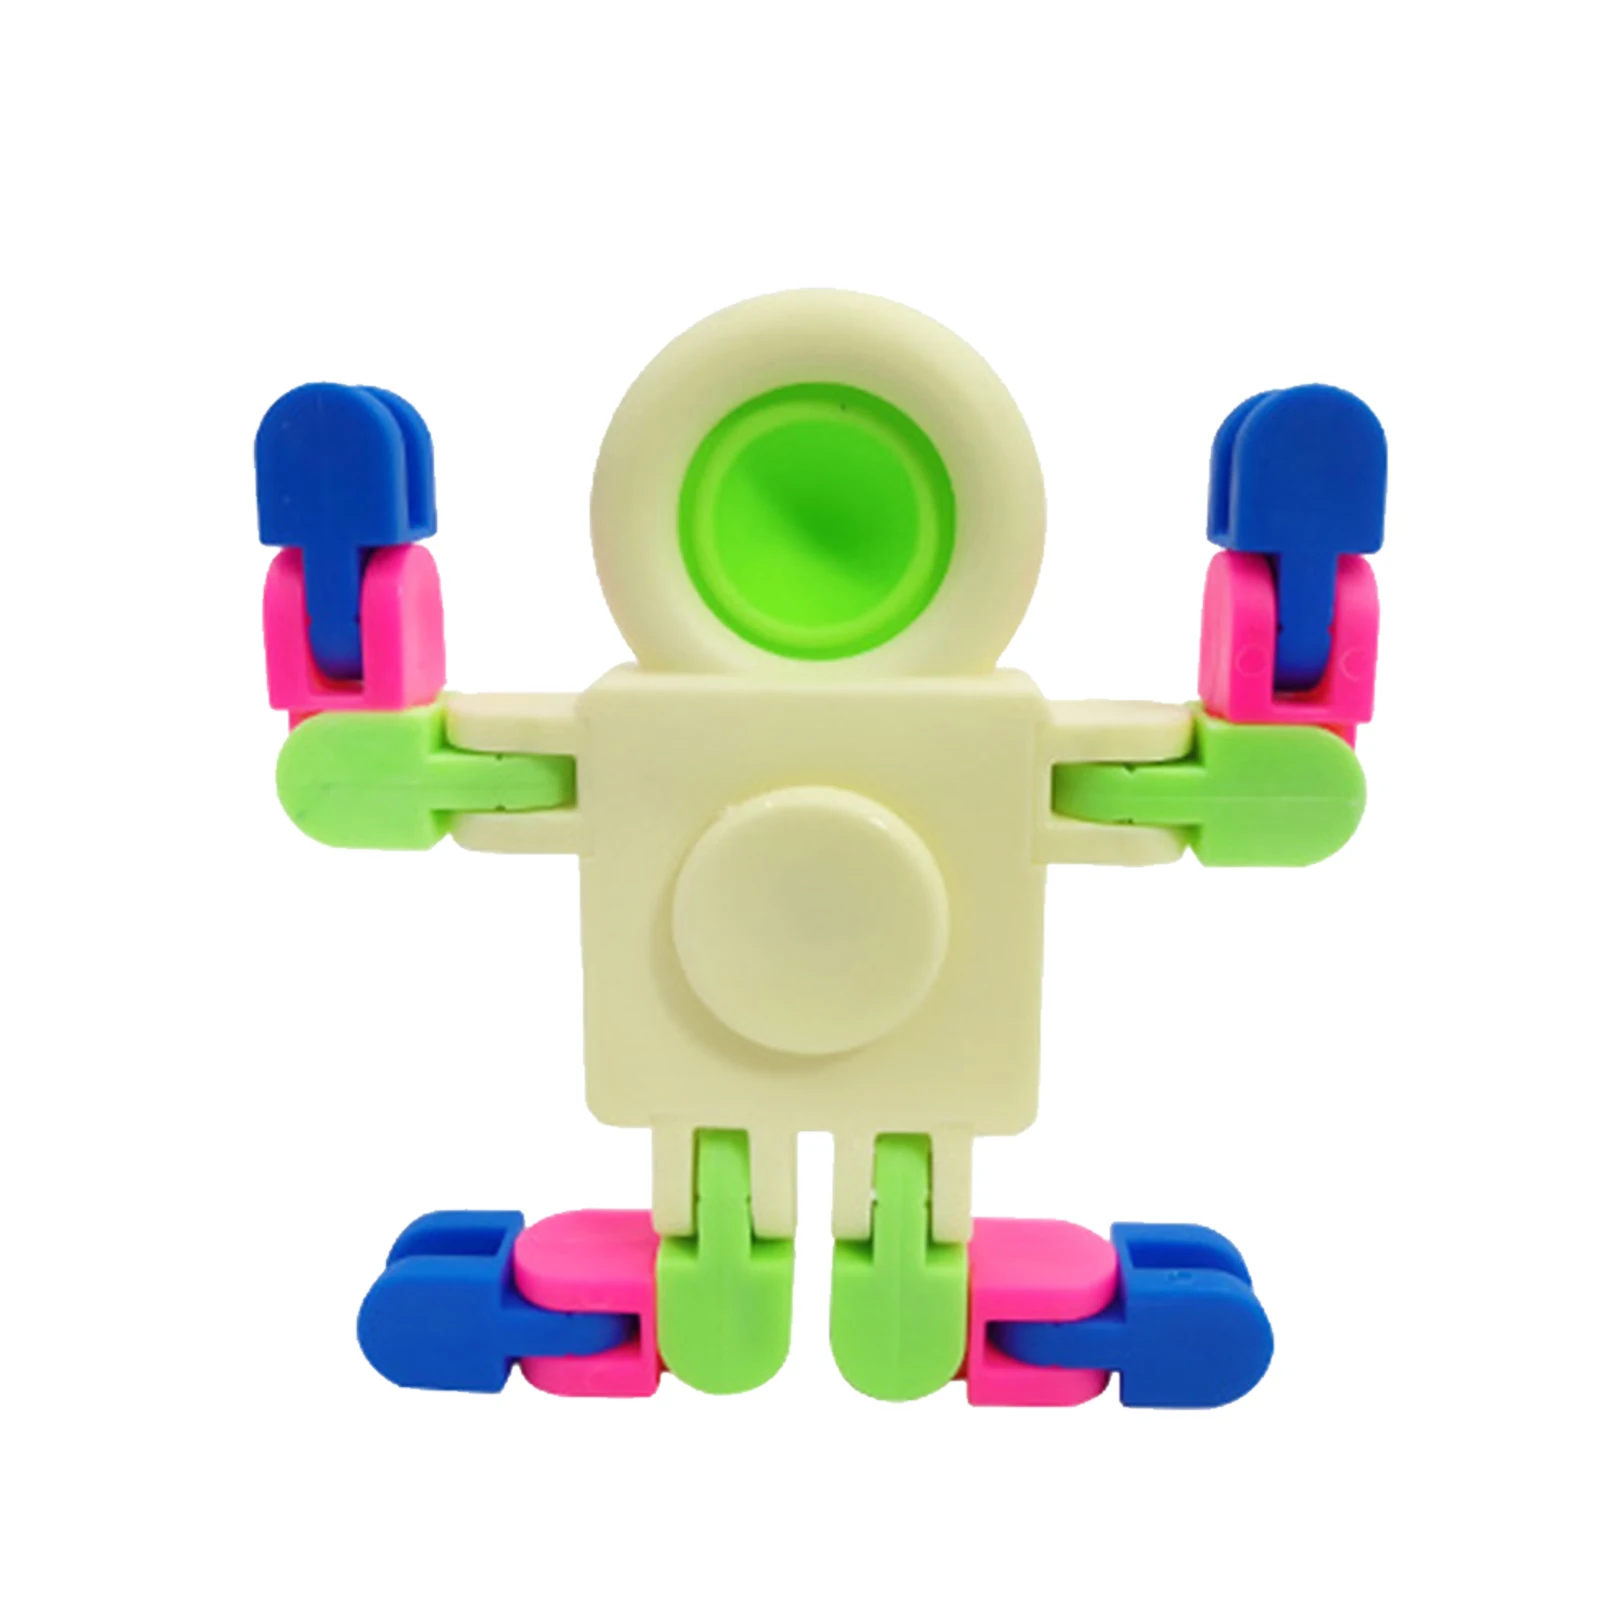 

Transformable Fingertip Sensory Mechanical Gyro Spinner Hand Toys Spaceman Chain Decompression Rotating Deformed Spinner